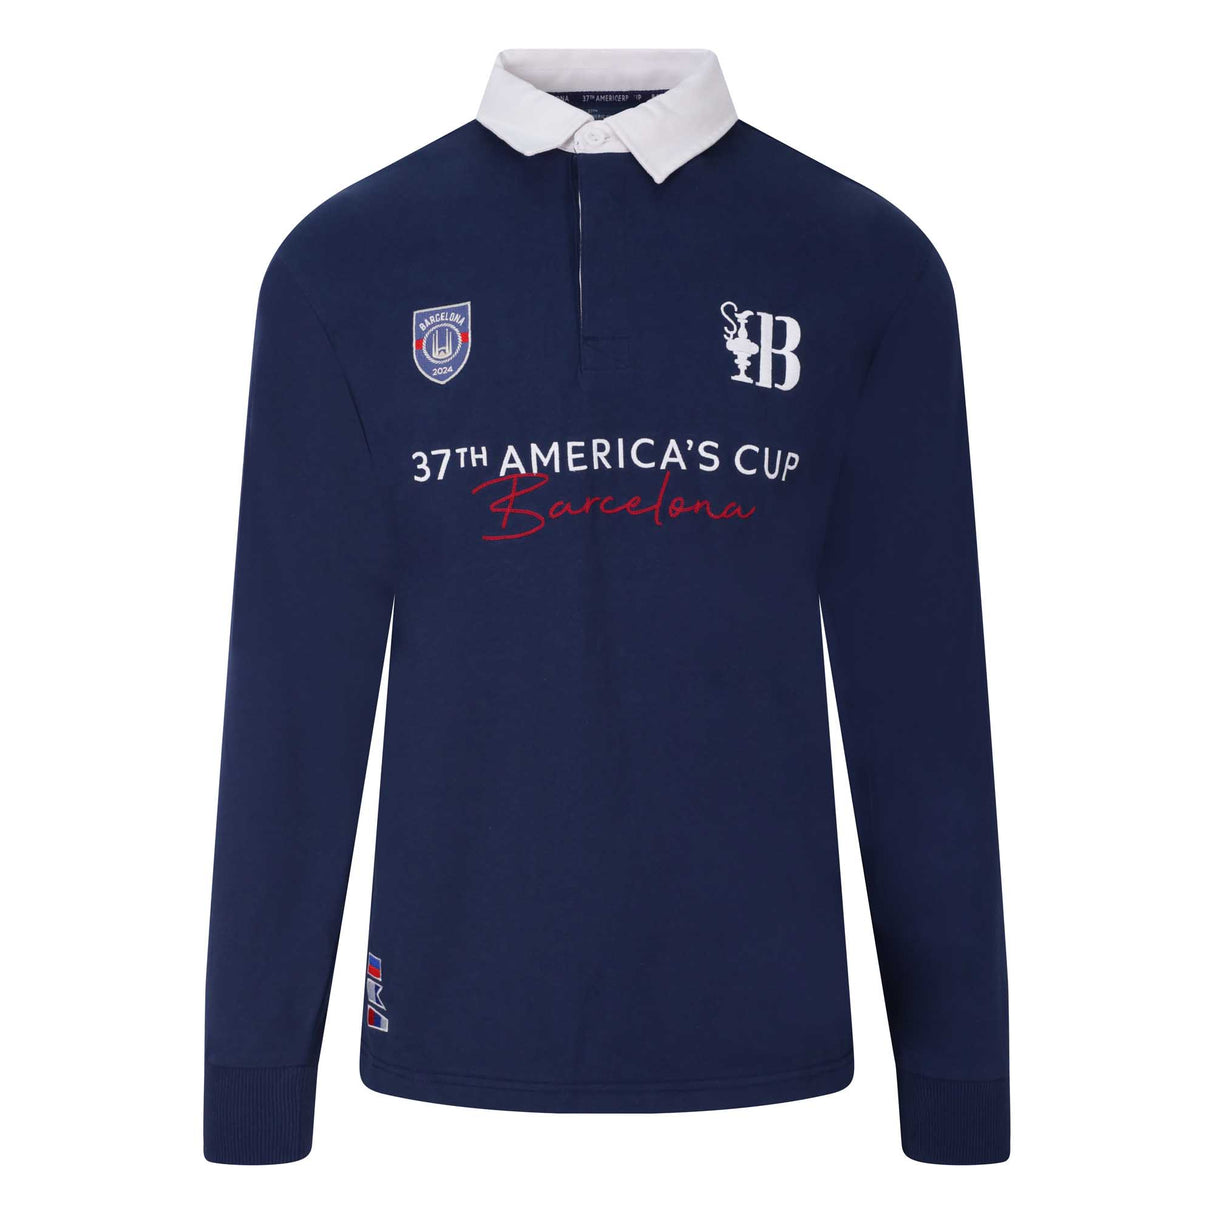 37th America's Cup AC League Sailing Jersey